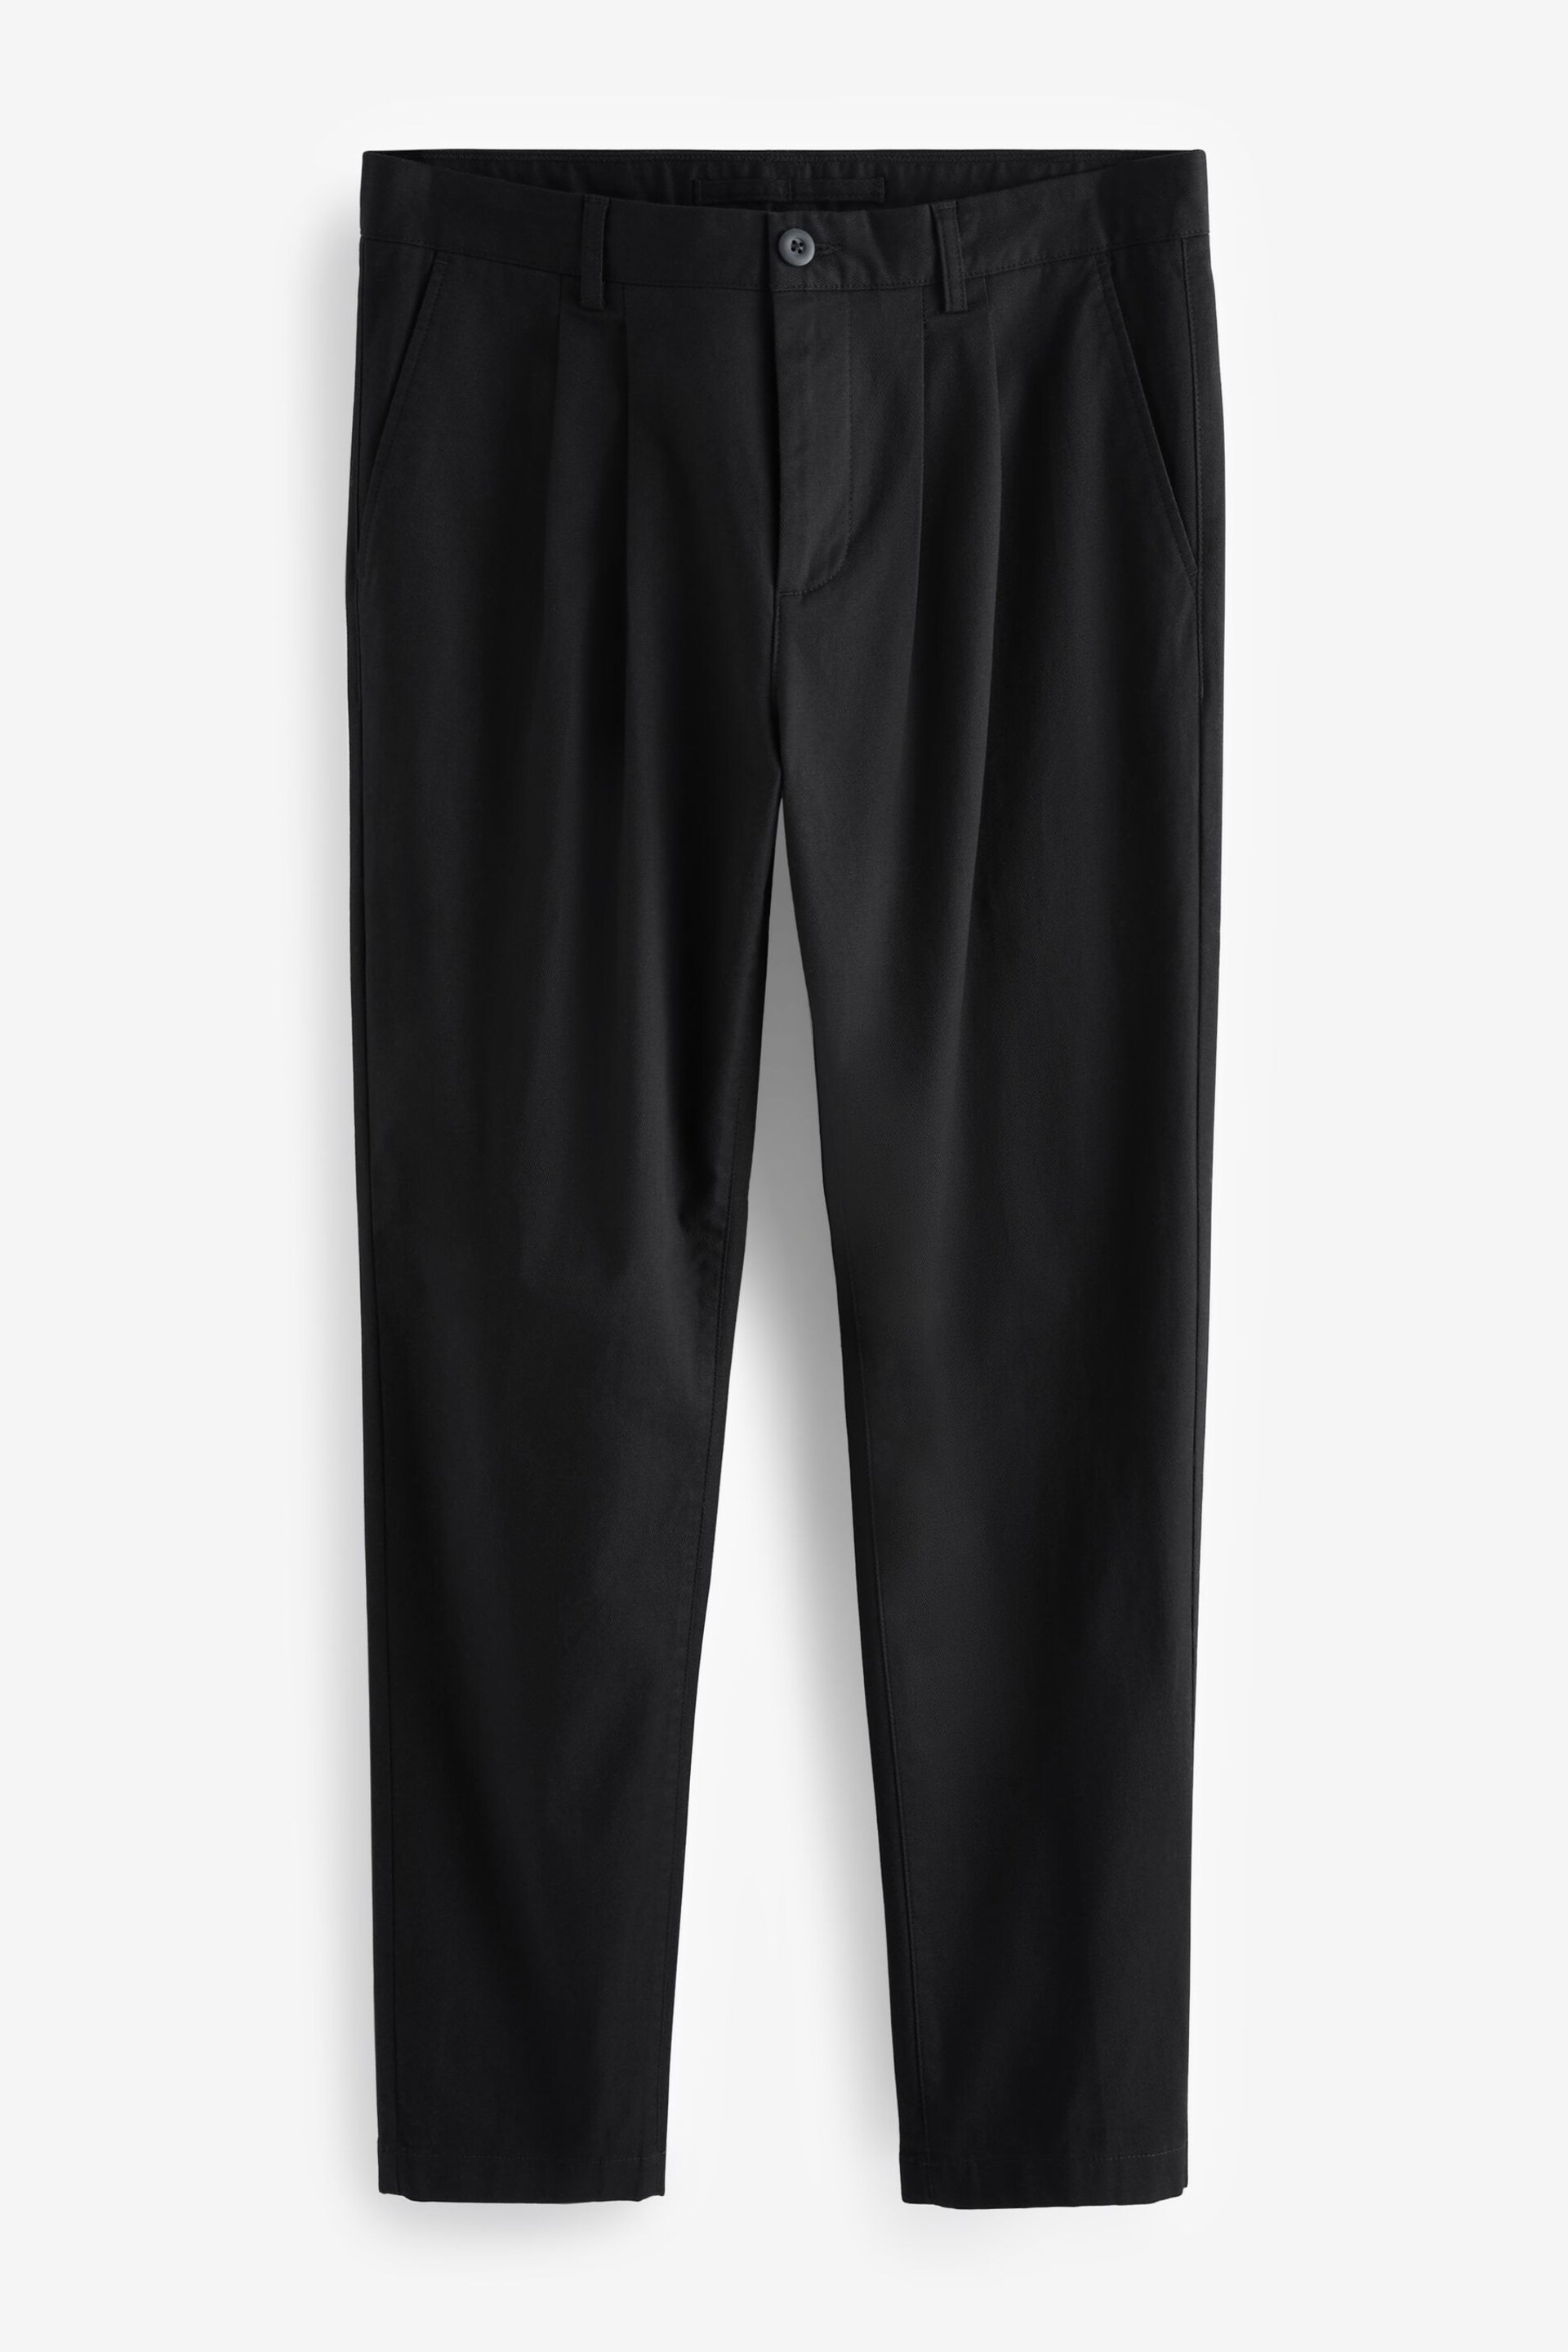 Black Twin Pleat Stretch Chinos Trousers - Image 6 of 10